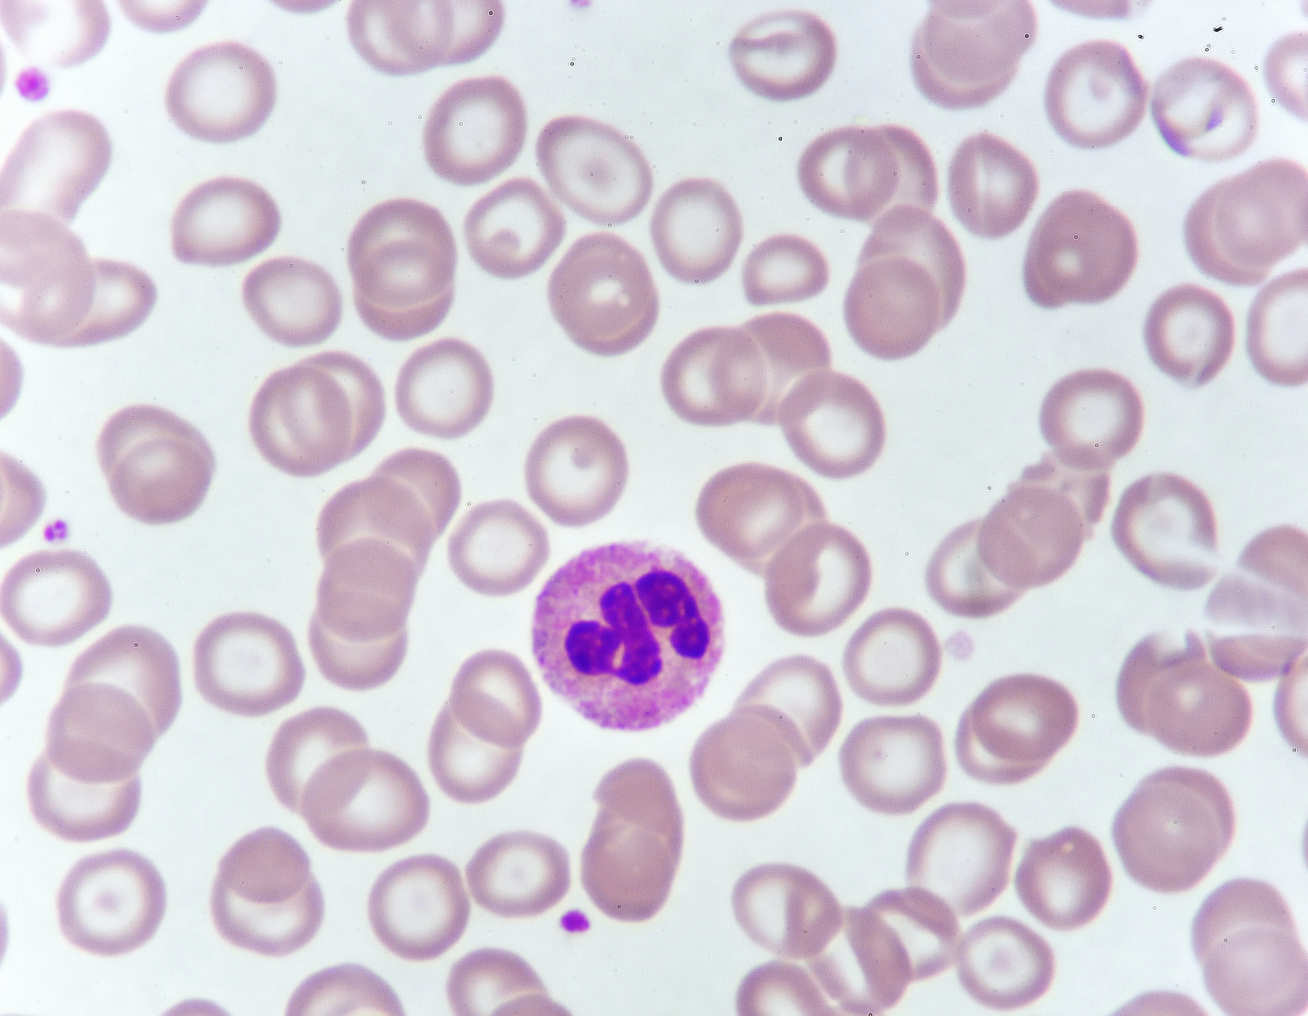 Neutrophil cell (white blood cell) in blood smear